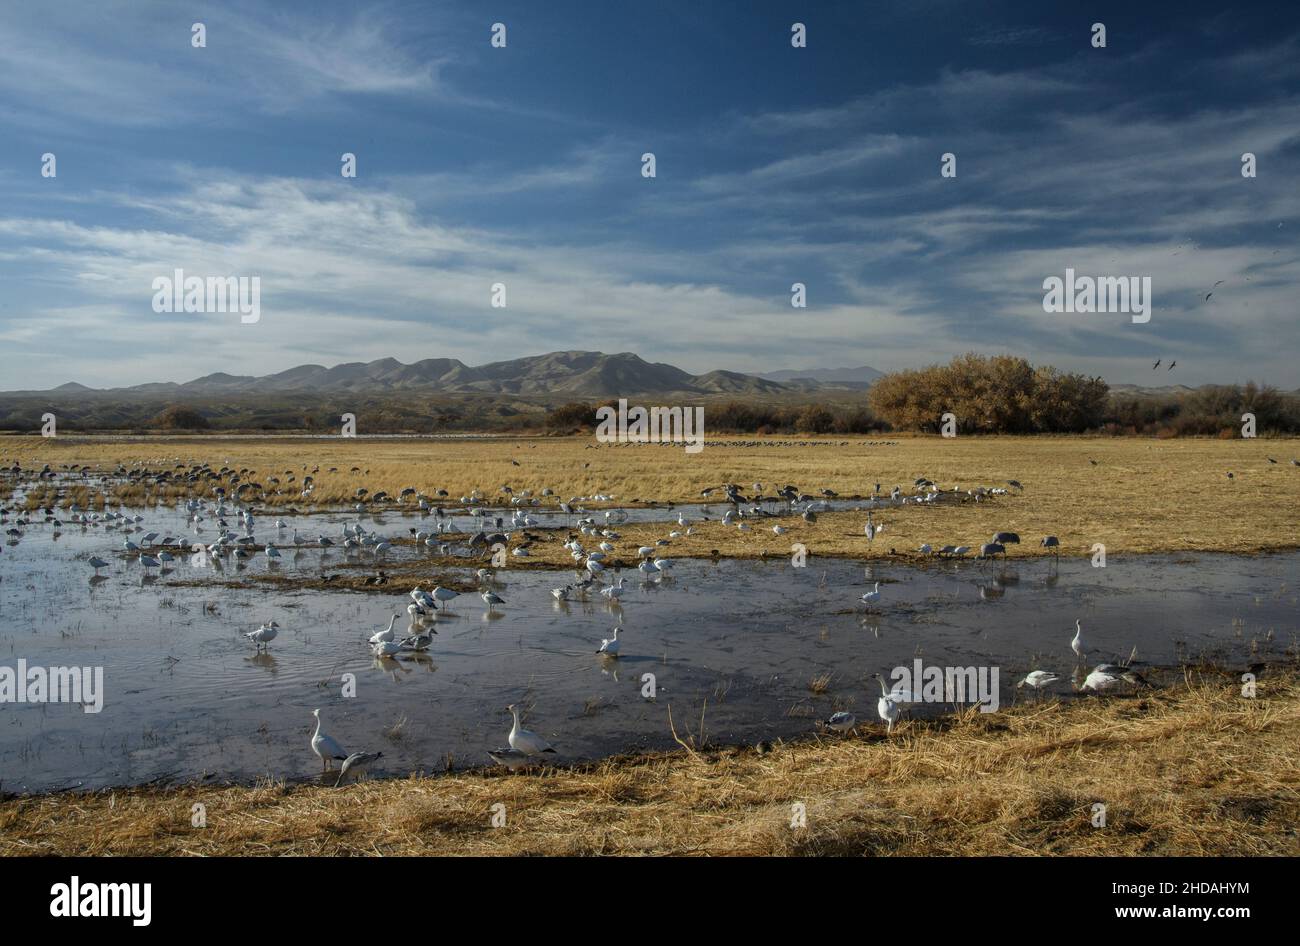 Snow geese, Anser caerulescens, and Sandhill Cranes, feeding in flooded fields, Rio Grande valley, Bosque del Apache. New Mexico. Stock Photo